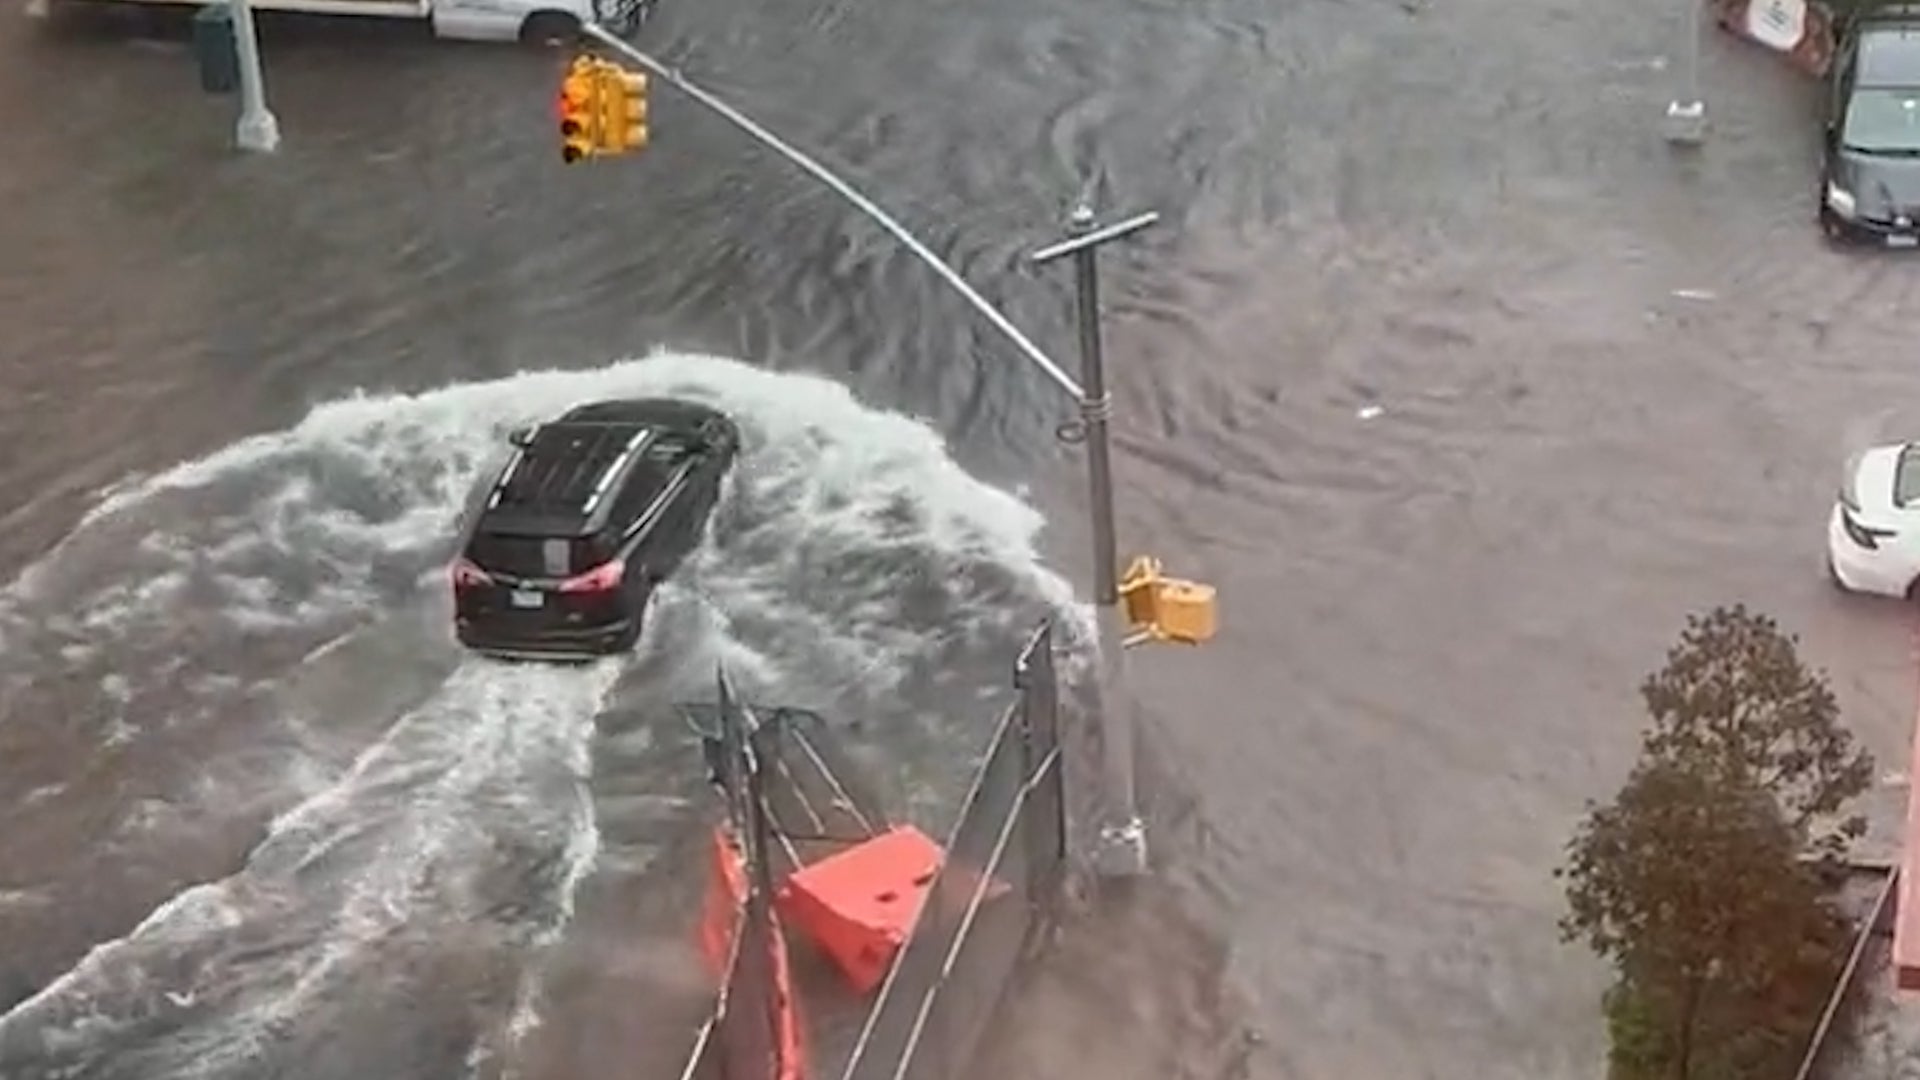 Heavy flooding is seen close to the Barclays Center in Prospect Heights, Brooklyn